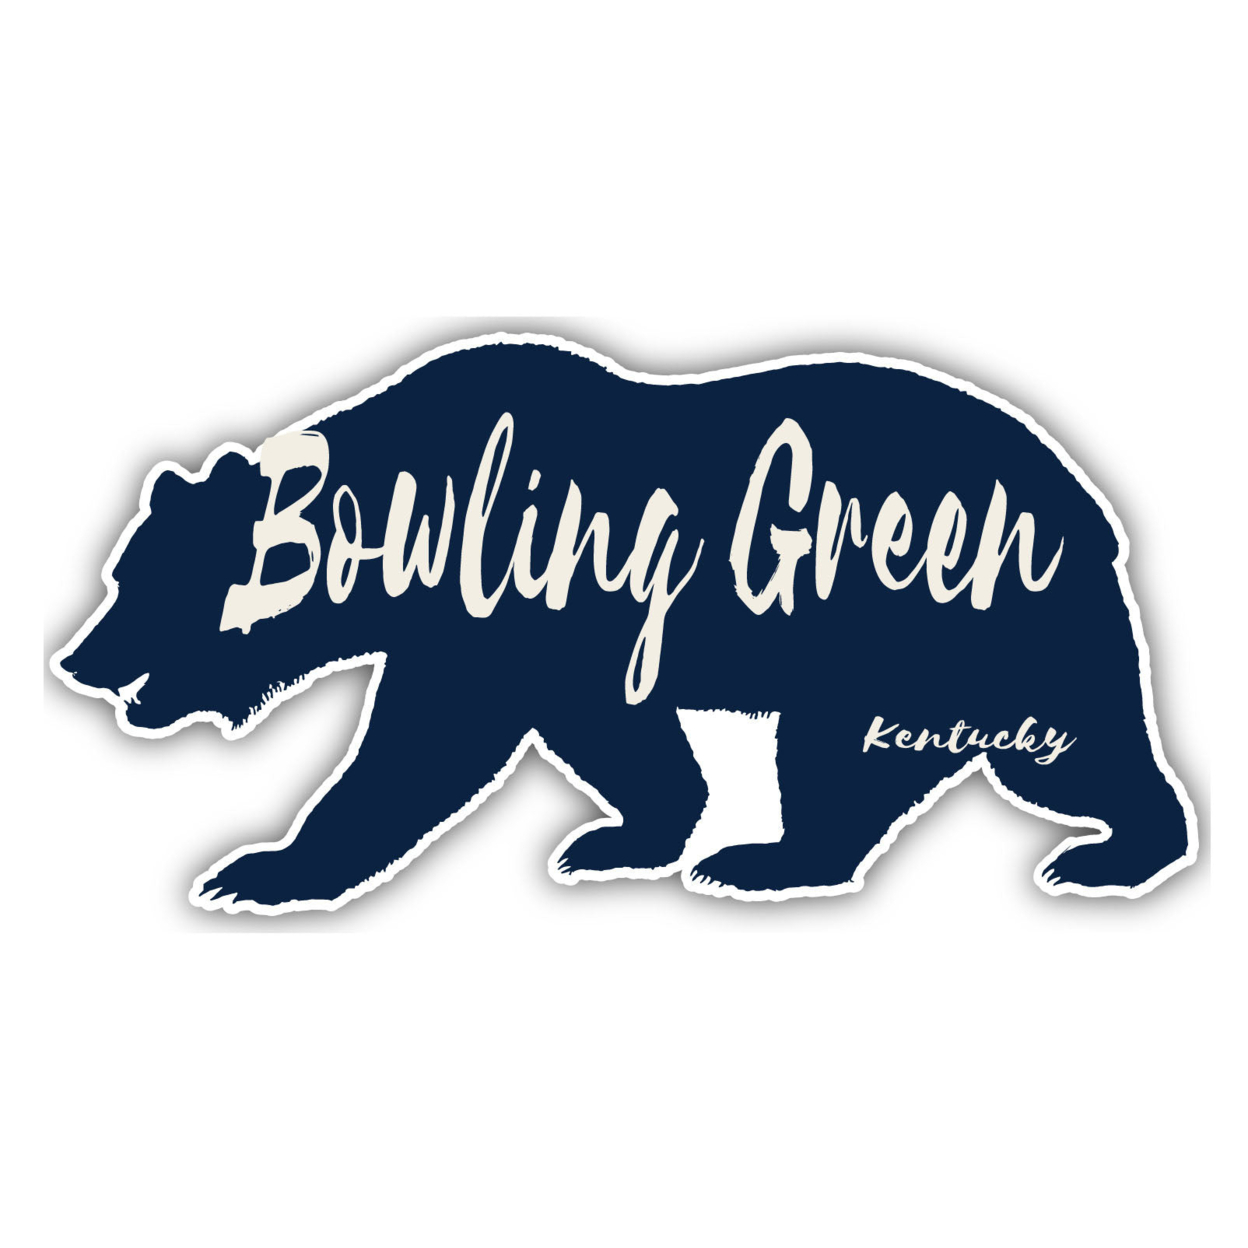 Bowling Green Kentucky Souvenir Decorative Stickers (Choose Theme And Size) - 4-Pack, 2-Inch, Tent